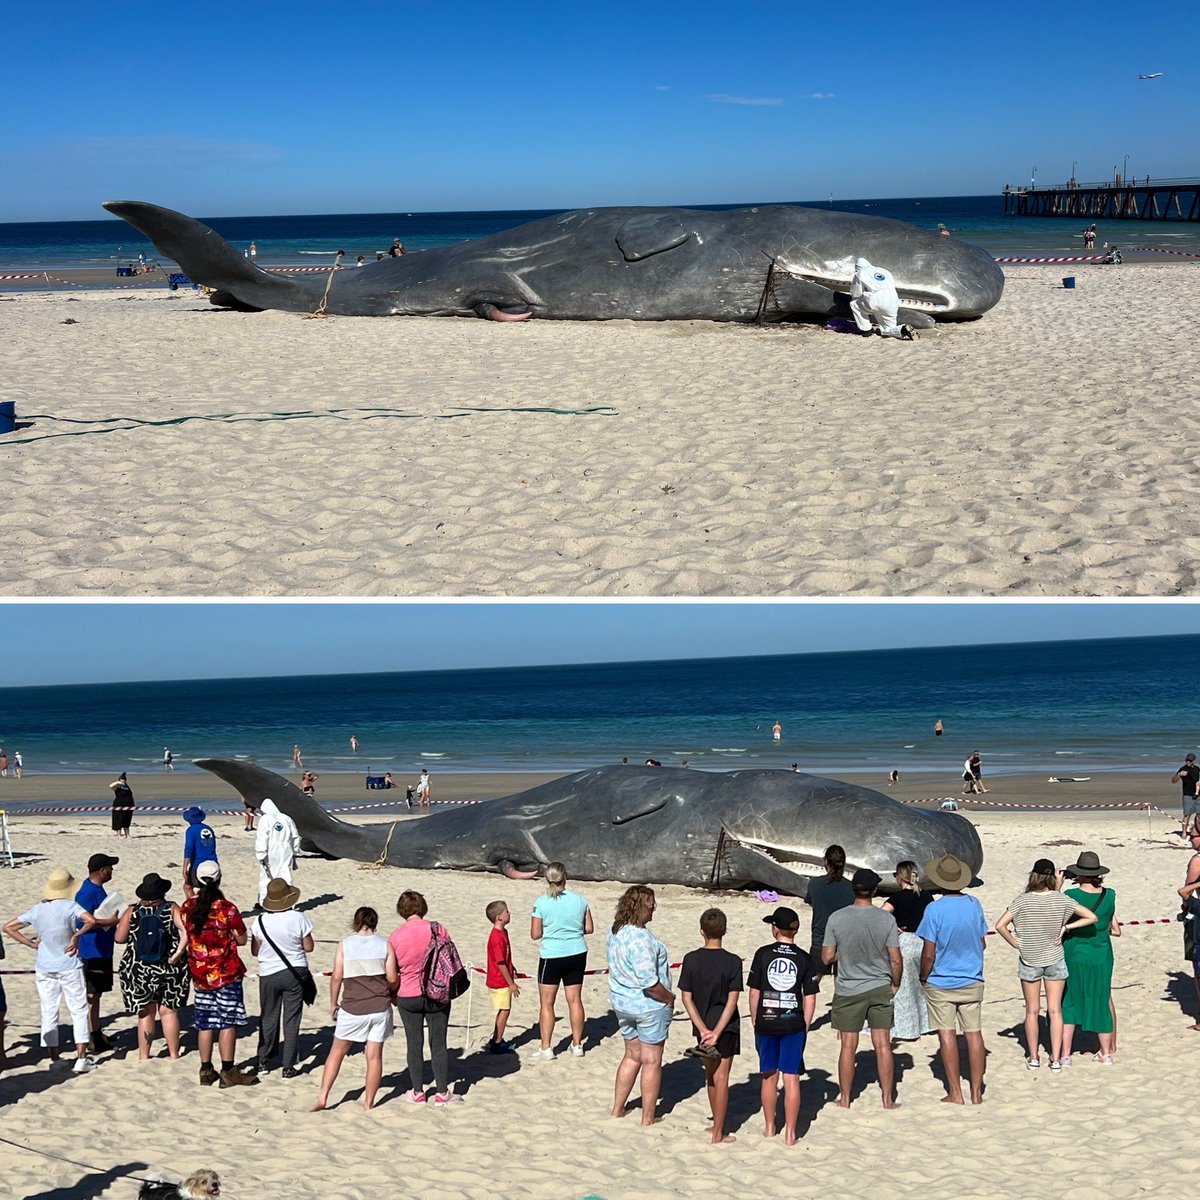 An incredible art installation used to provoke conversations about climate change. 

Have you seen it?  What do you think?

#AdelaideFestival #ArtImitatesLife #Glenelg #adlfest